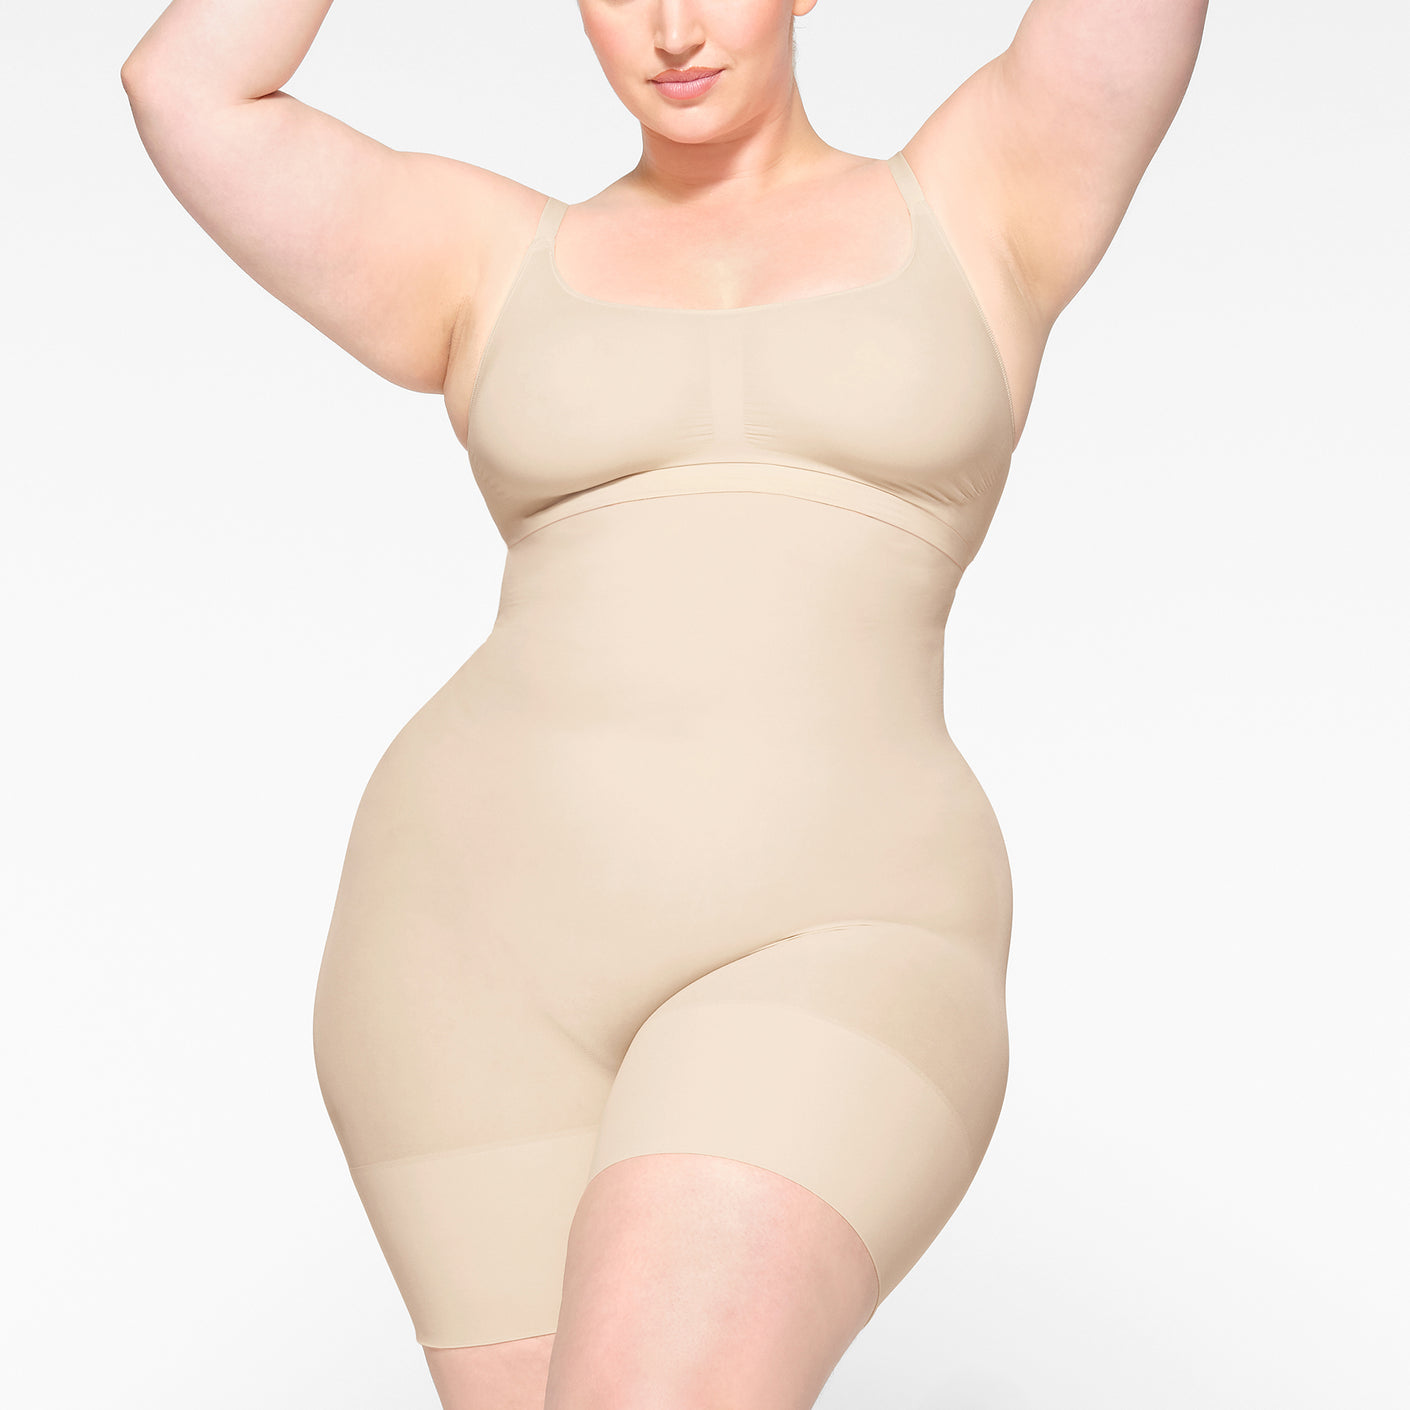 Huge SKIMS BEST SELLING BASICS Try on, Fits Everybody, Soft Smoothing, Recycled Nylon, Sculpt